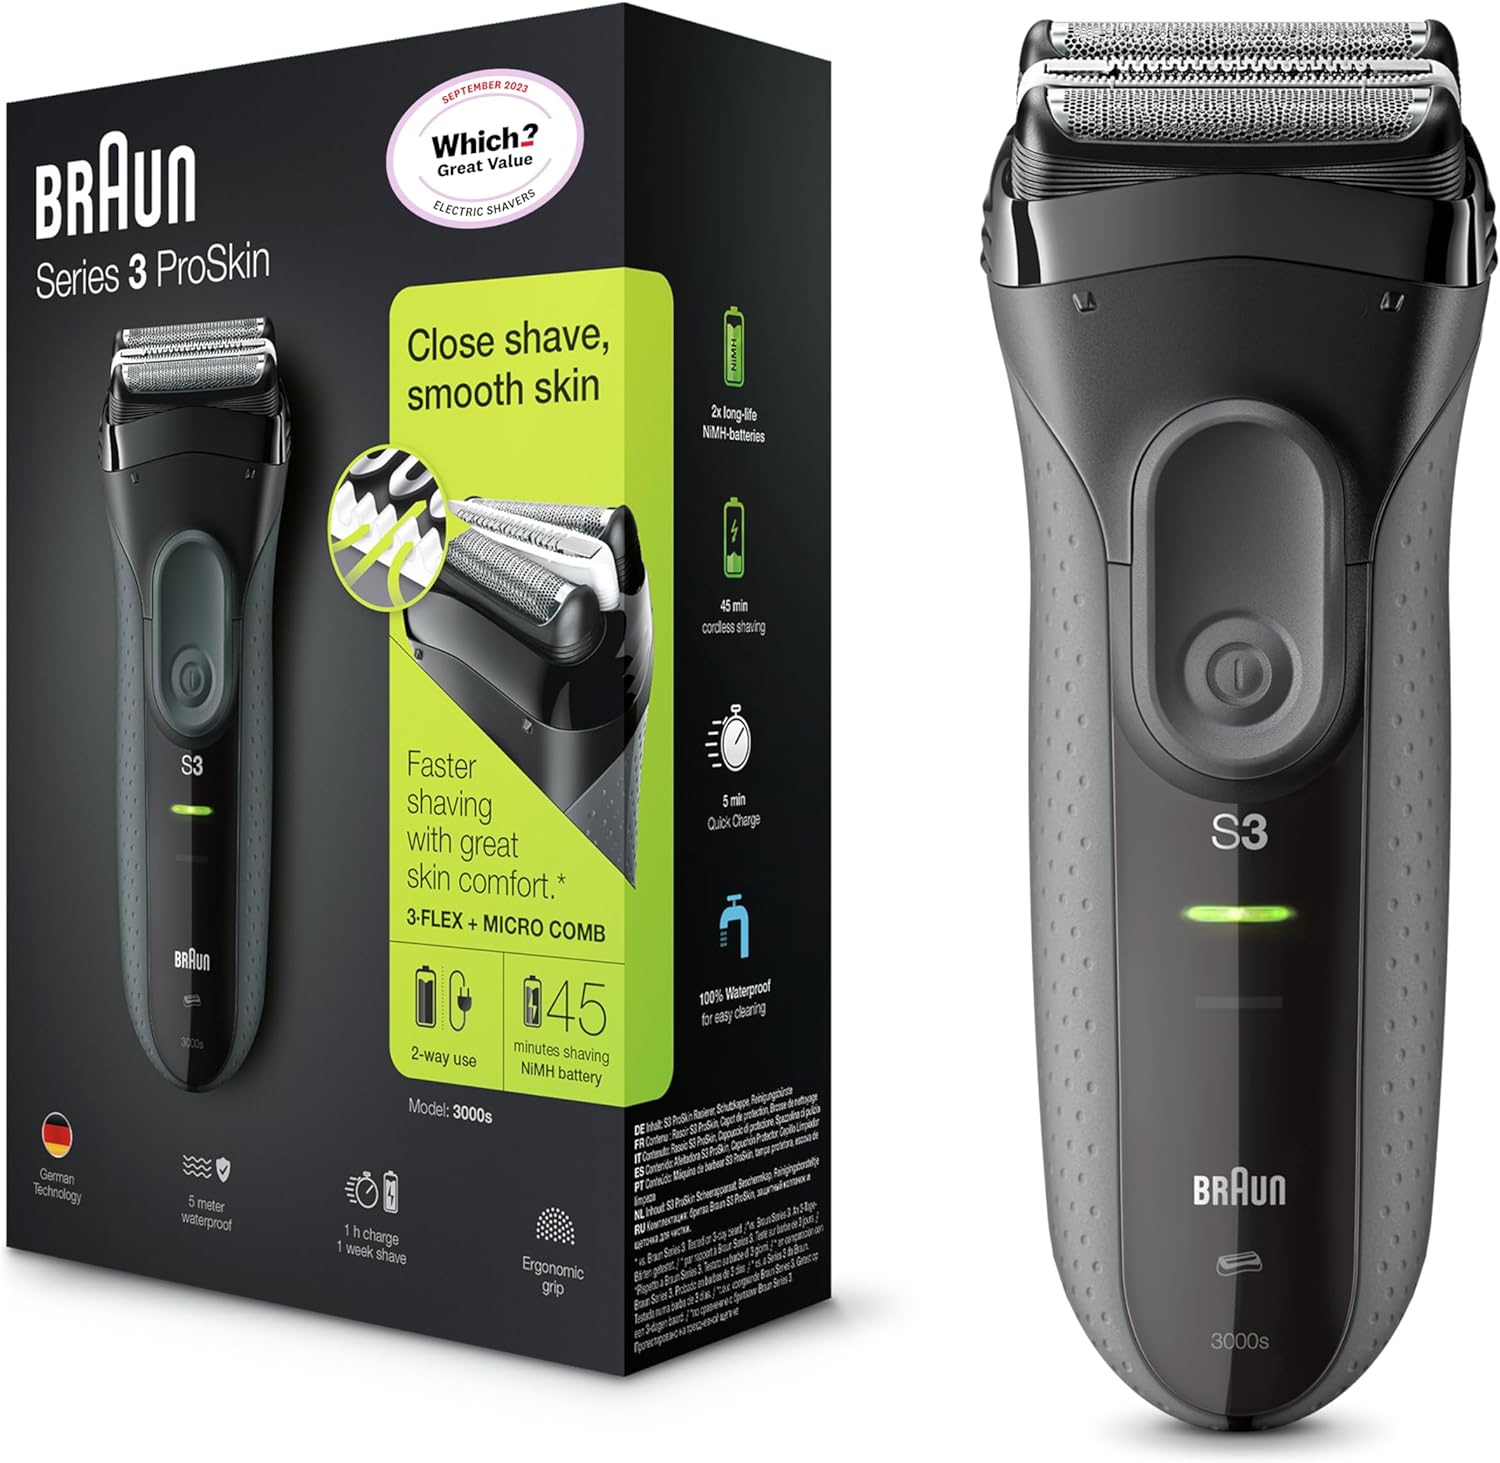 Braun Series 3 ProSkin Electric Shaver For Men With Precision Trimmer, Rechargeable and Cordless, 100% Waterproof, UK 2 Pin Plug, 3000s, Black Razor, Rated Which Great Value